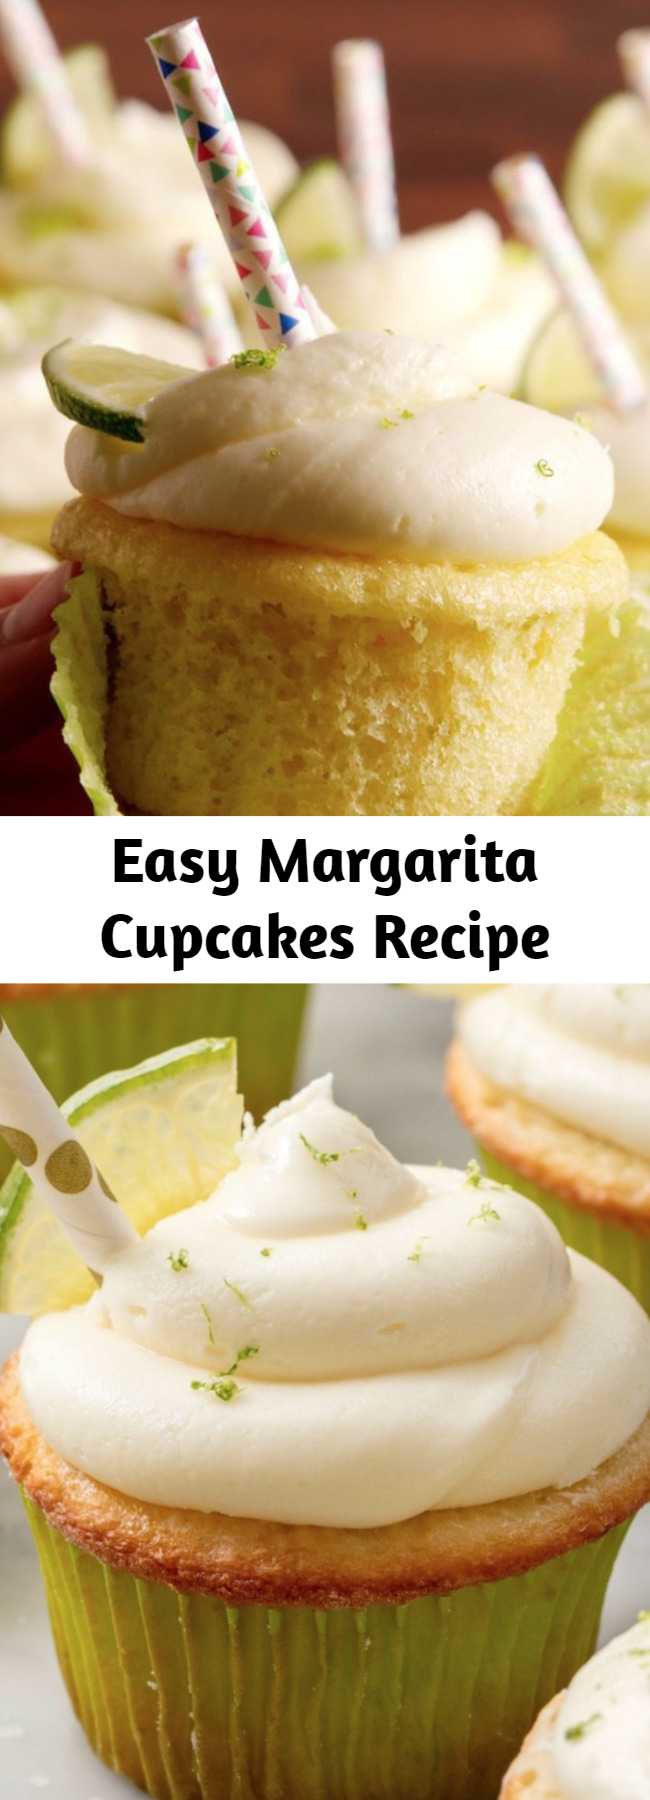 Easy Margarita Cupcakes Recipe - Check out this easy recipe for the best margarita cupcakes! Everything's better in cupcake form!